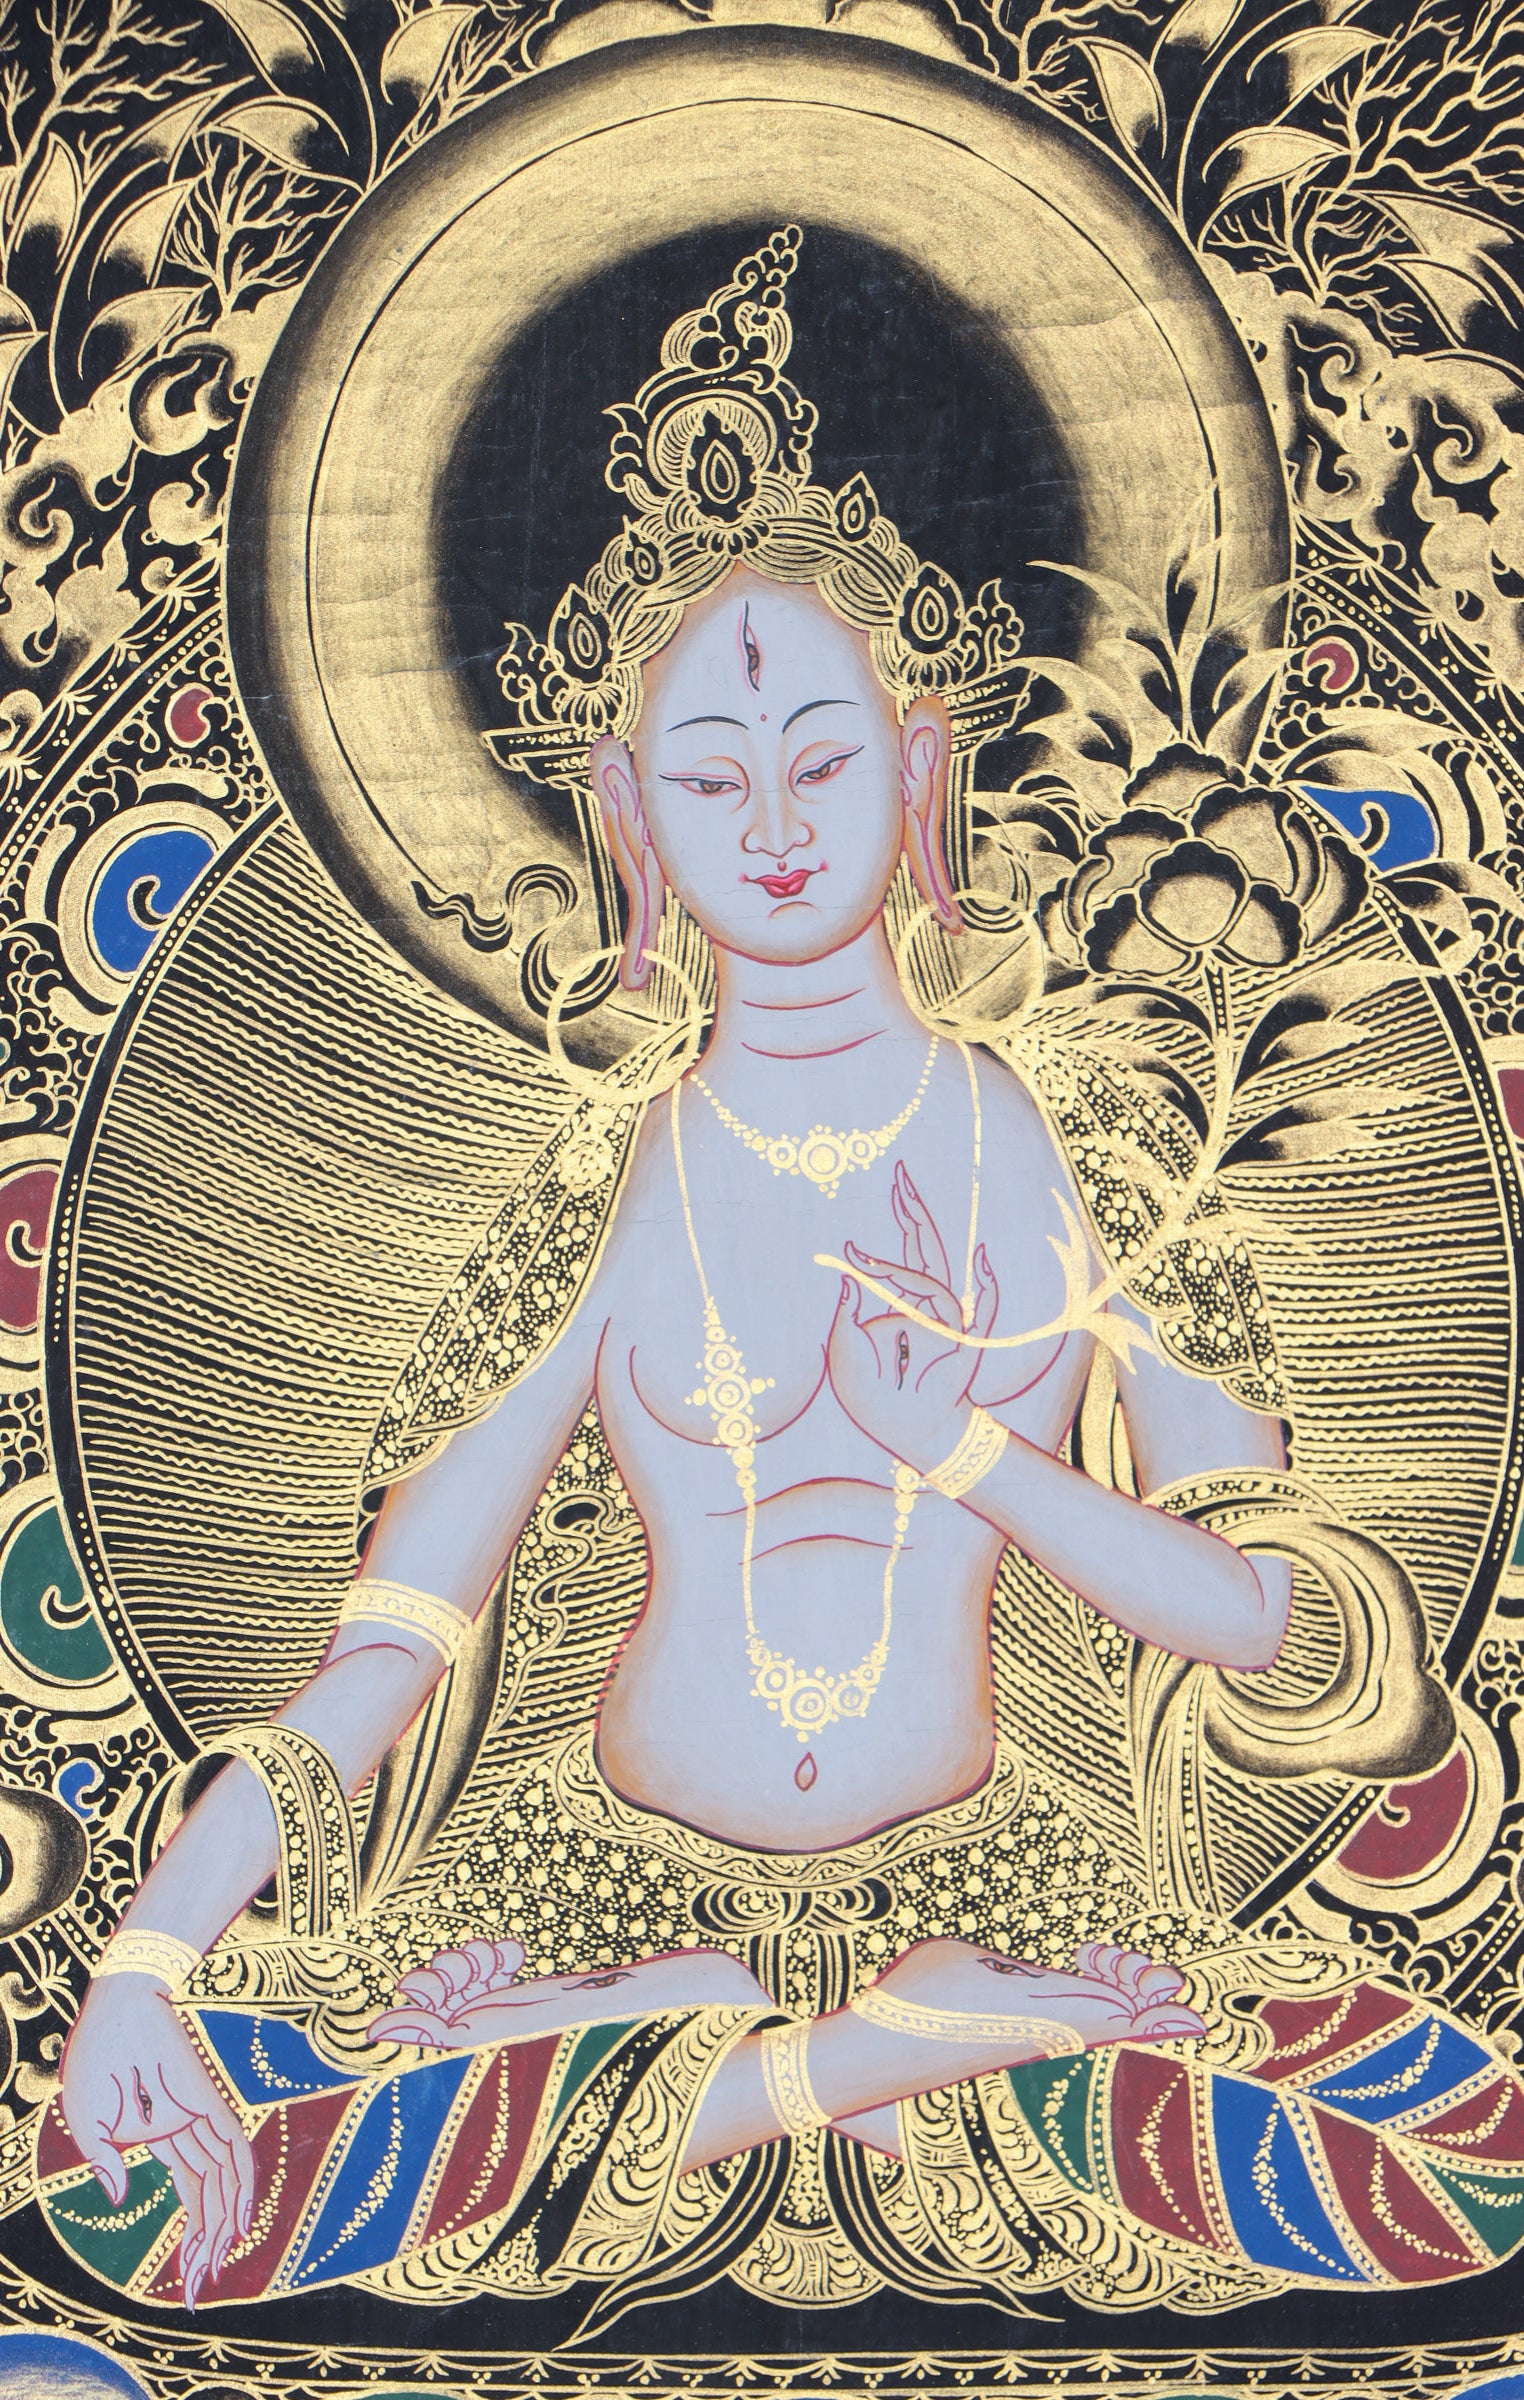 White Tara Thangka Painting for wisdom and compassion.